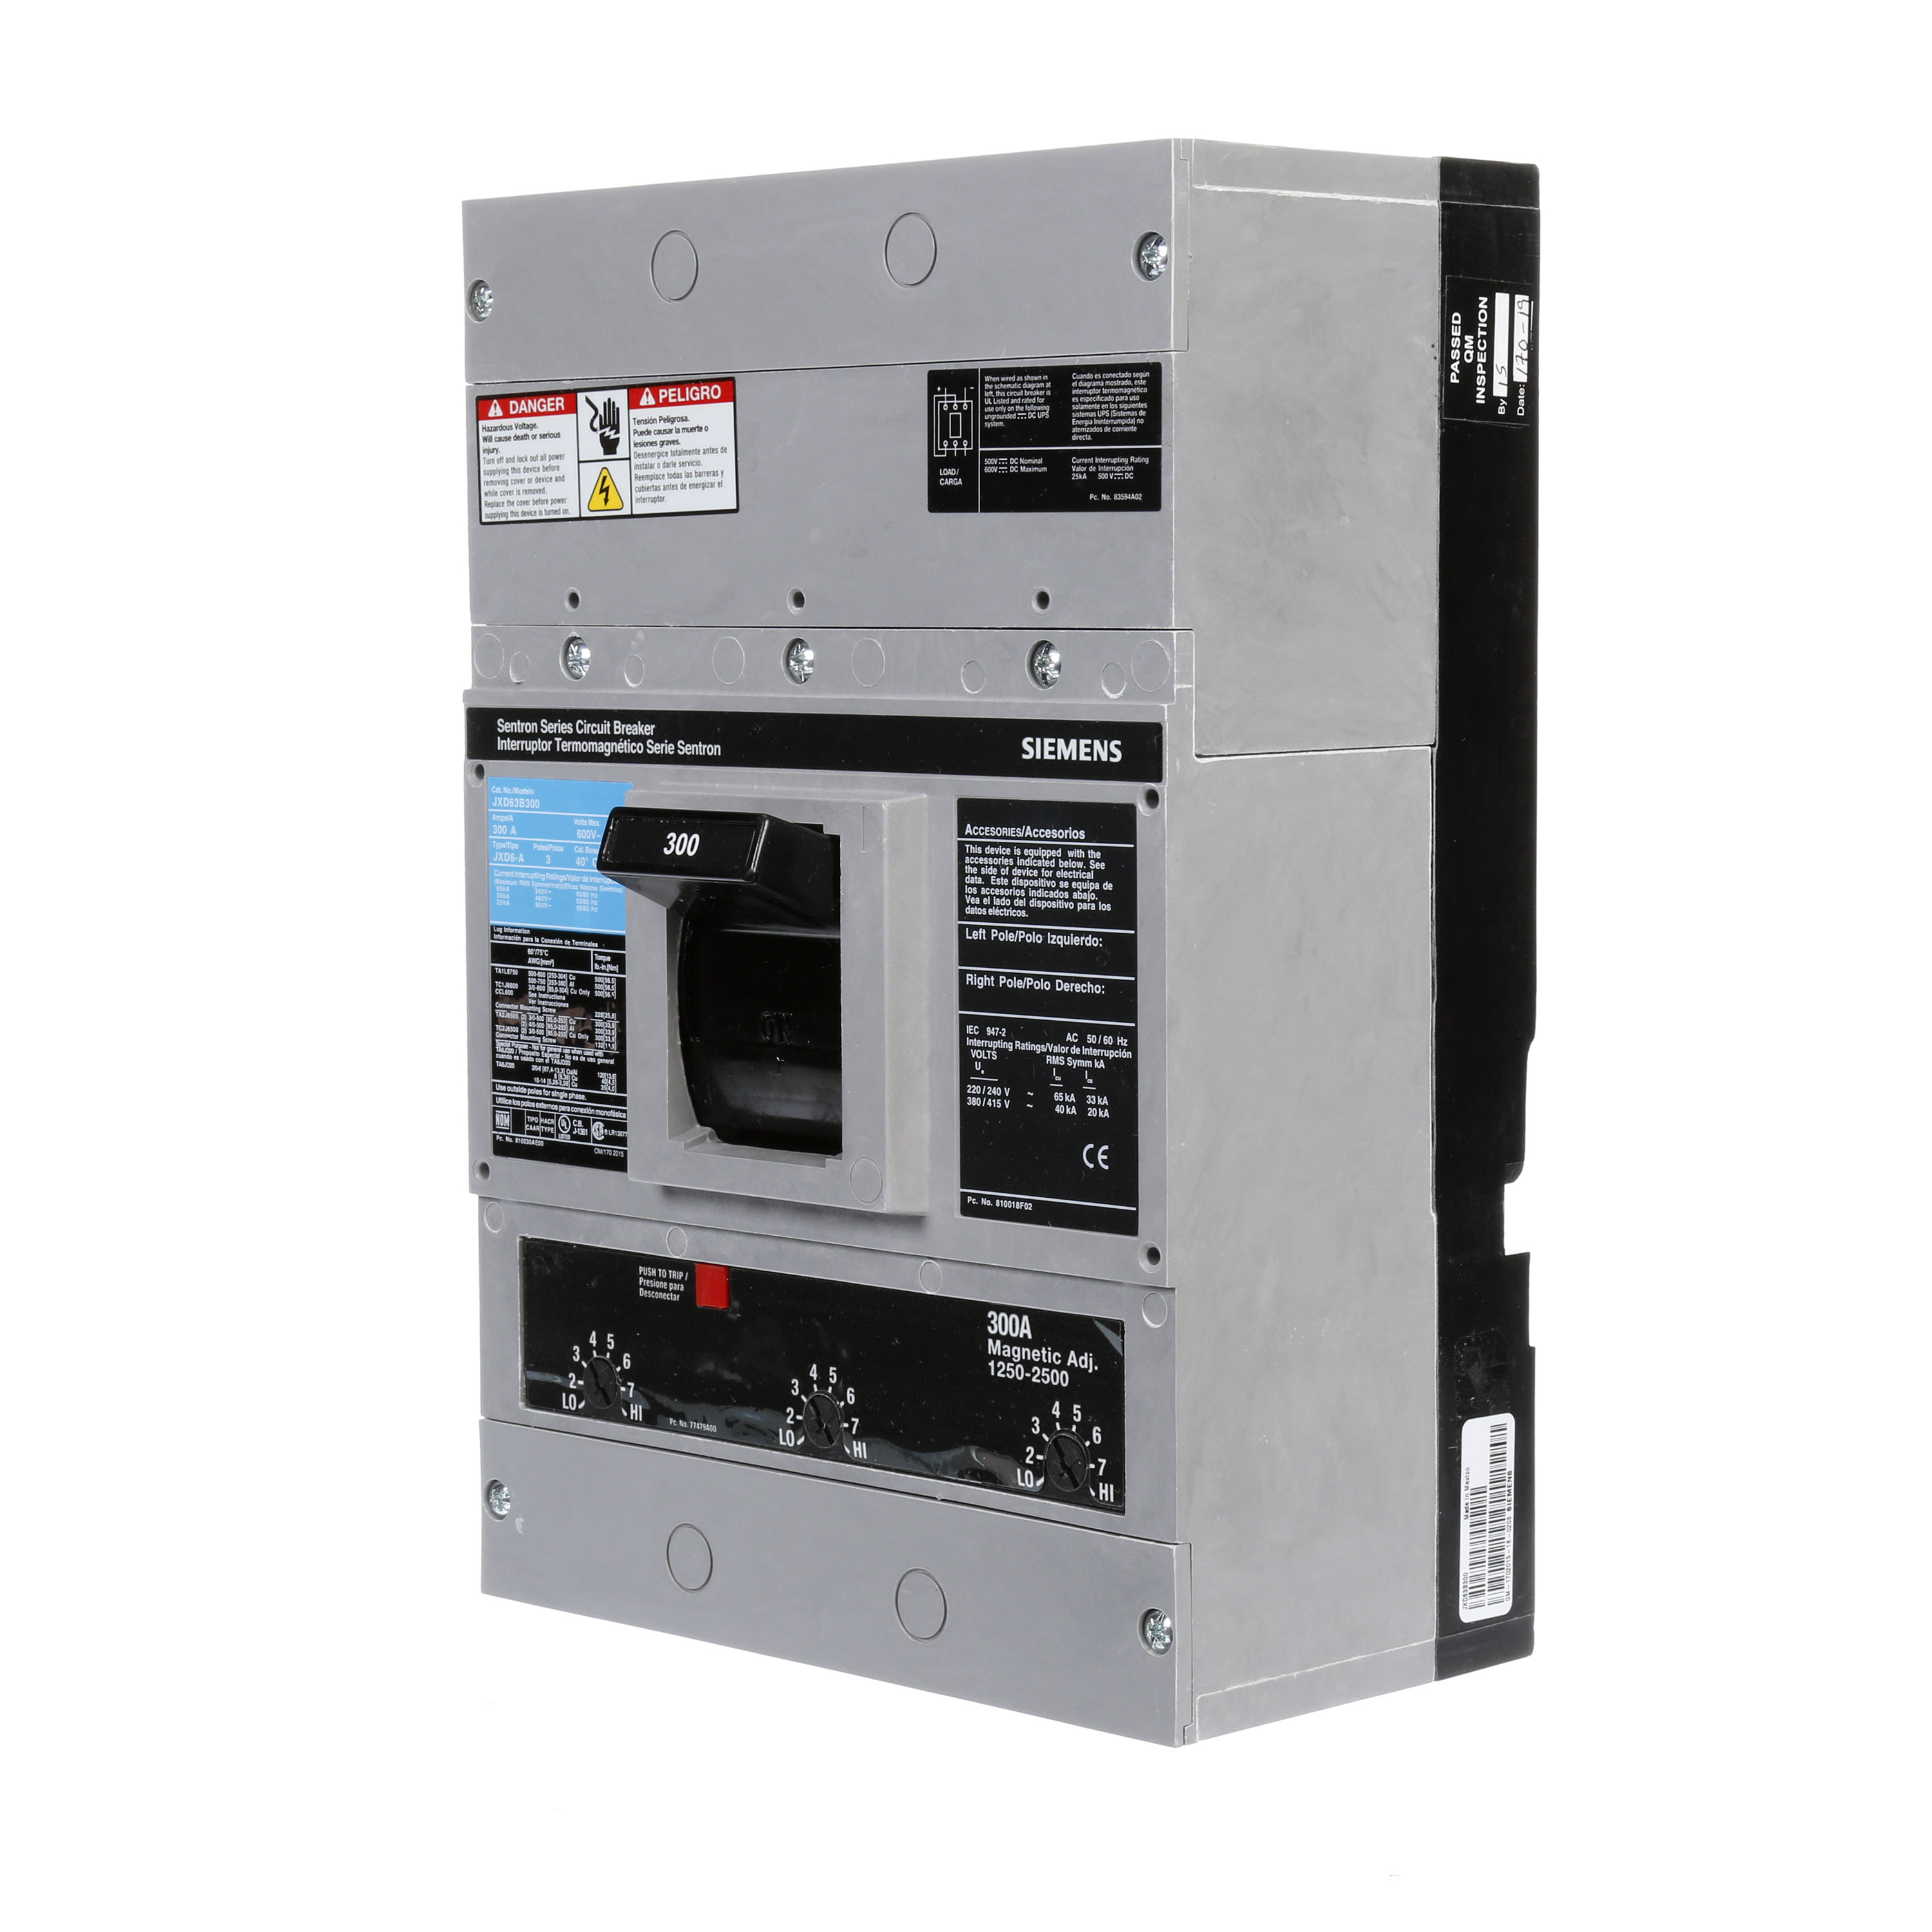 SIEMENS LOW VOLTAGE SENTRON MOLDED CASE CIRCUIT BREAKER WITH THERMAL - MAGNETICTRIP UNIT. ASSEMBLED STANDARD 40 DEG C BREAKER JD FRAME WITH STANDARD BREAKING CAPACITY. 300A 3-POLE (25KAIC AT 600V) (35KAIC AT 480V). NON-INTERCHANGEABLE TRIP UNIT. SPECIAL FEATURES NO LUGS INSTALLED. DIMENSIONS (W x H x D) IN 7.50 x 11.0 x 4.00.